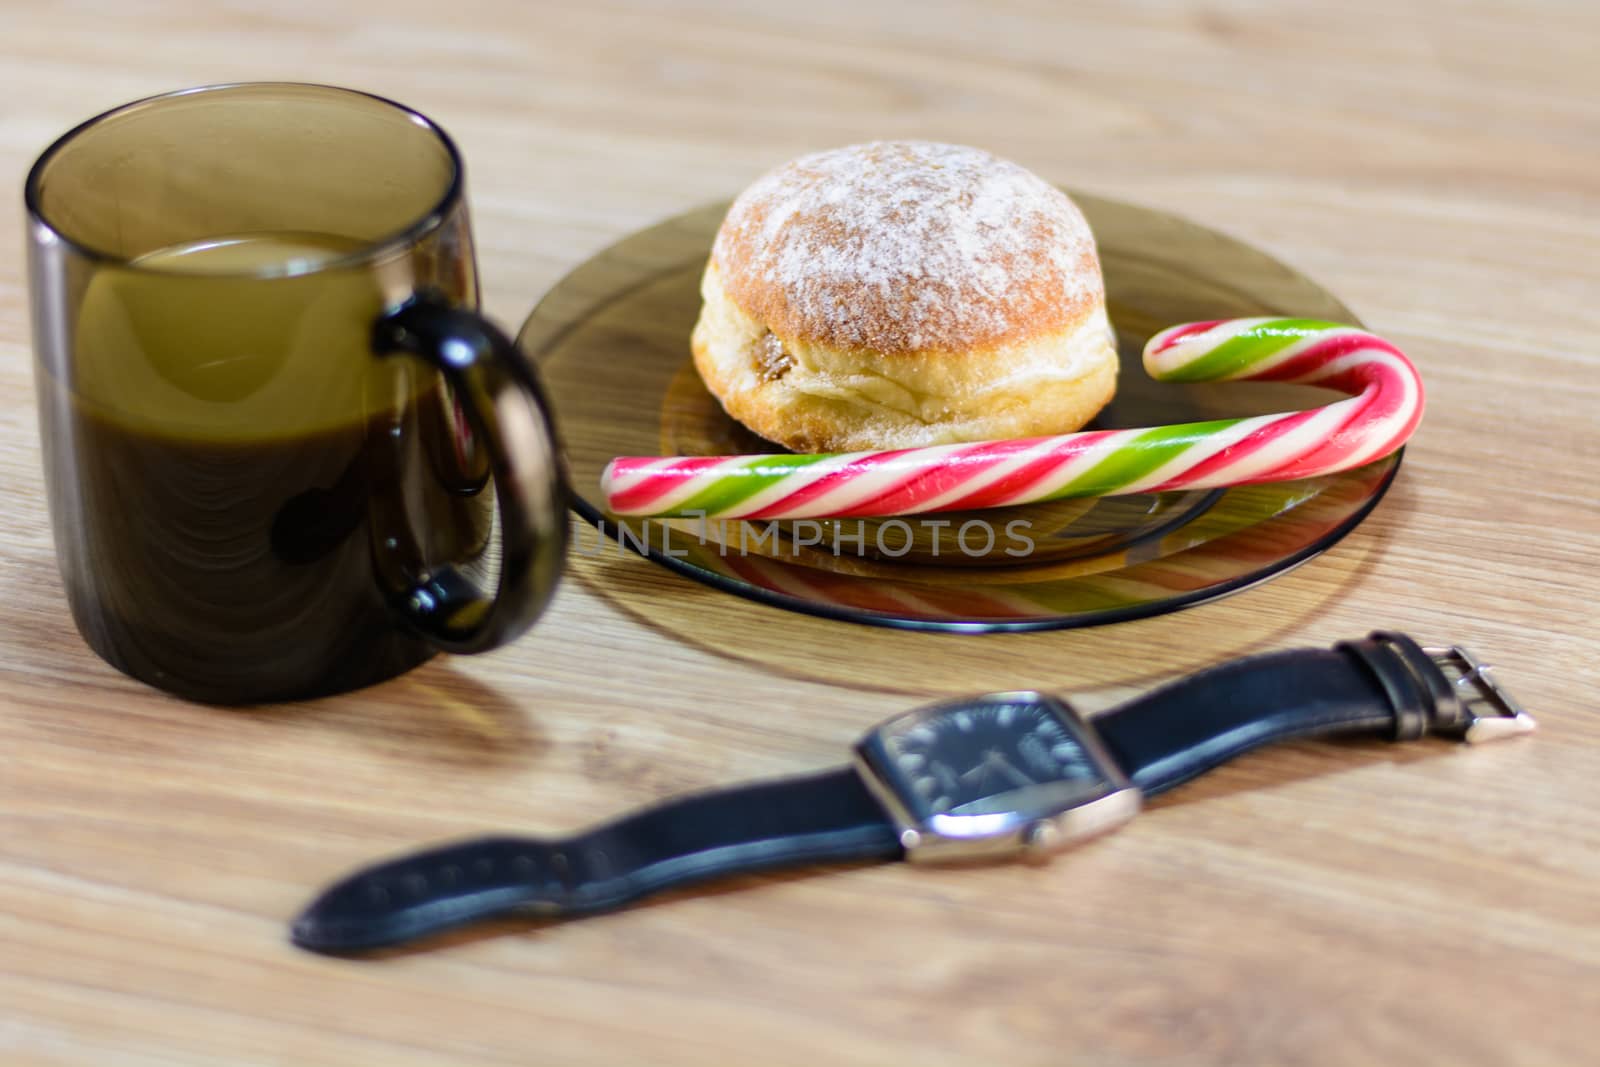 on the plate of a bun and candy along with coffee by boys1983@mail.ru